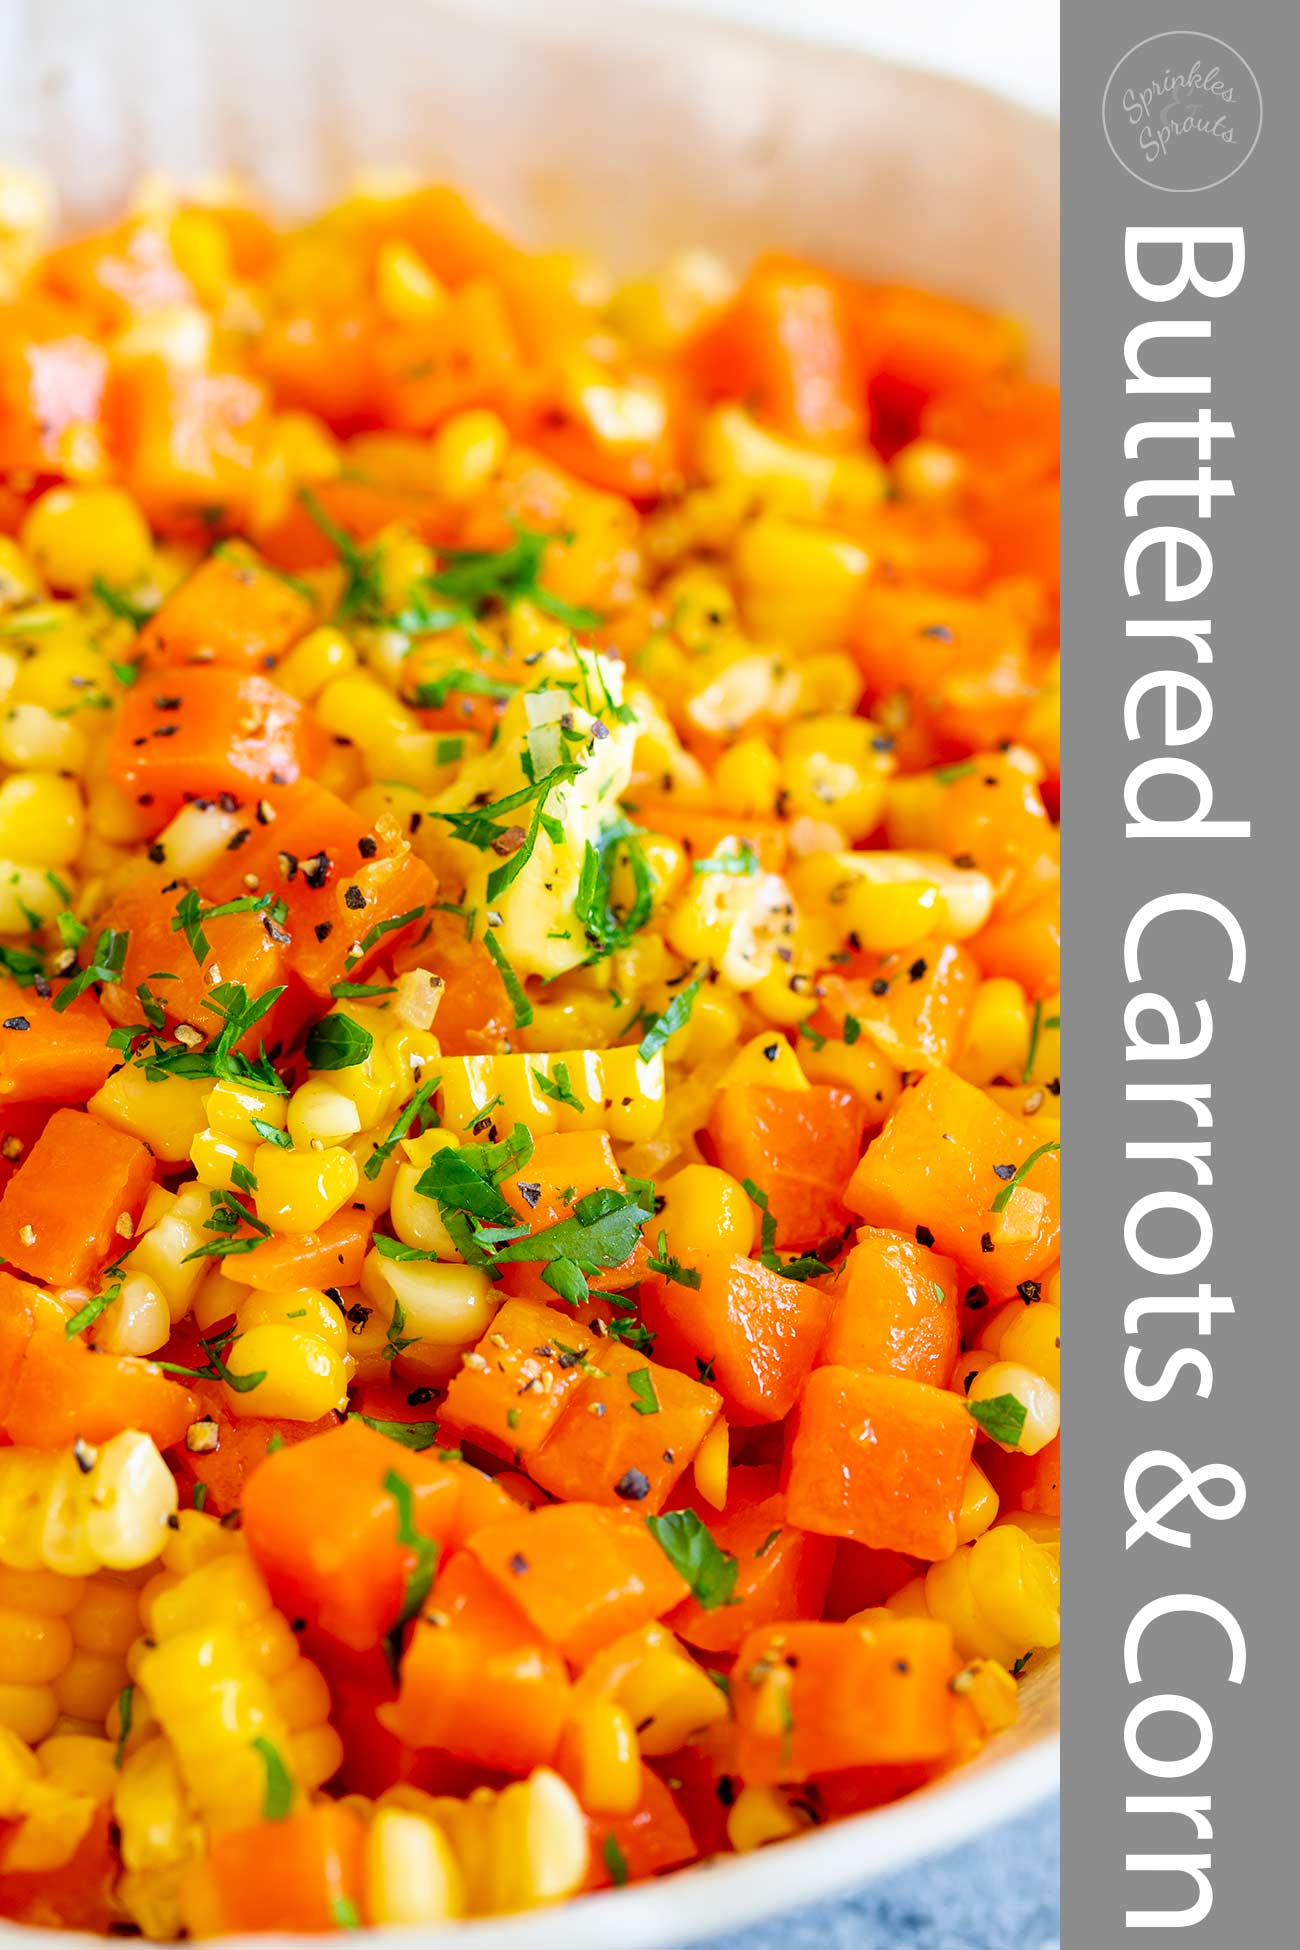 PINTEREST IMAGE: Buttered carrots and corn with text overlay